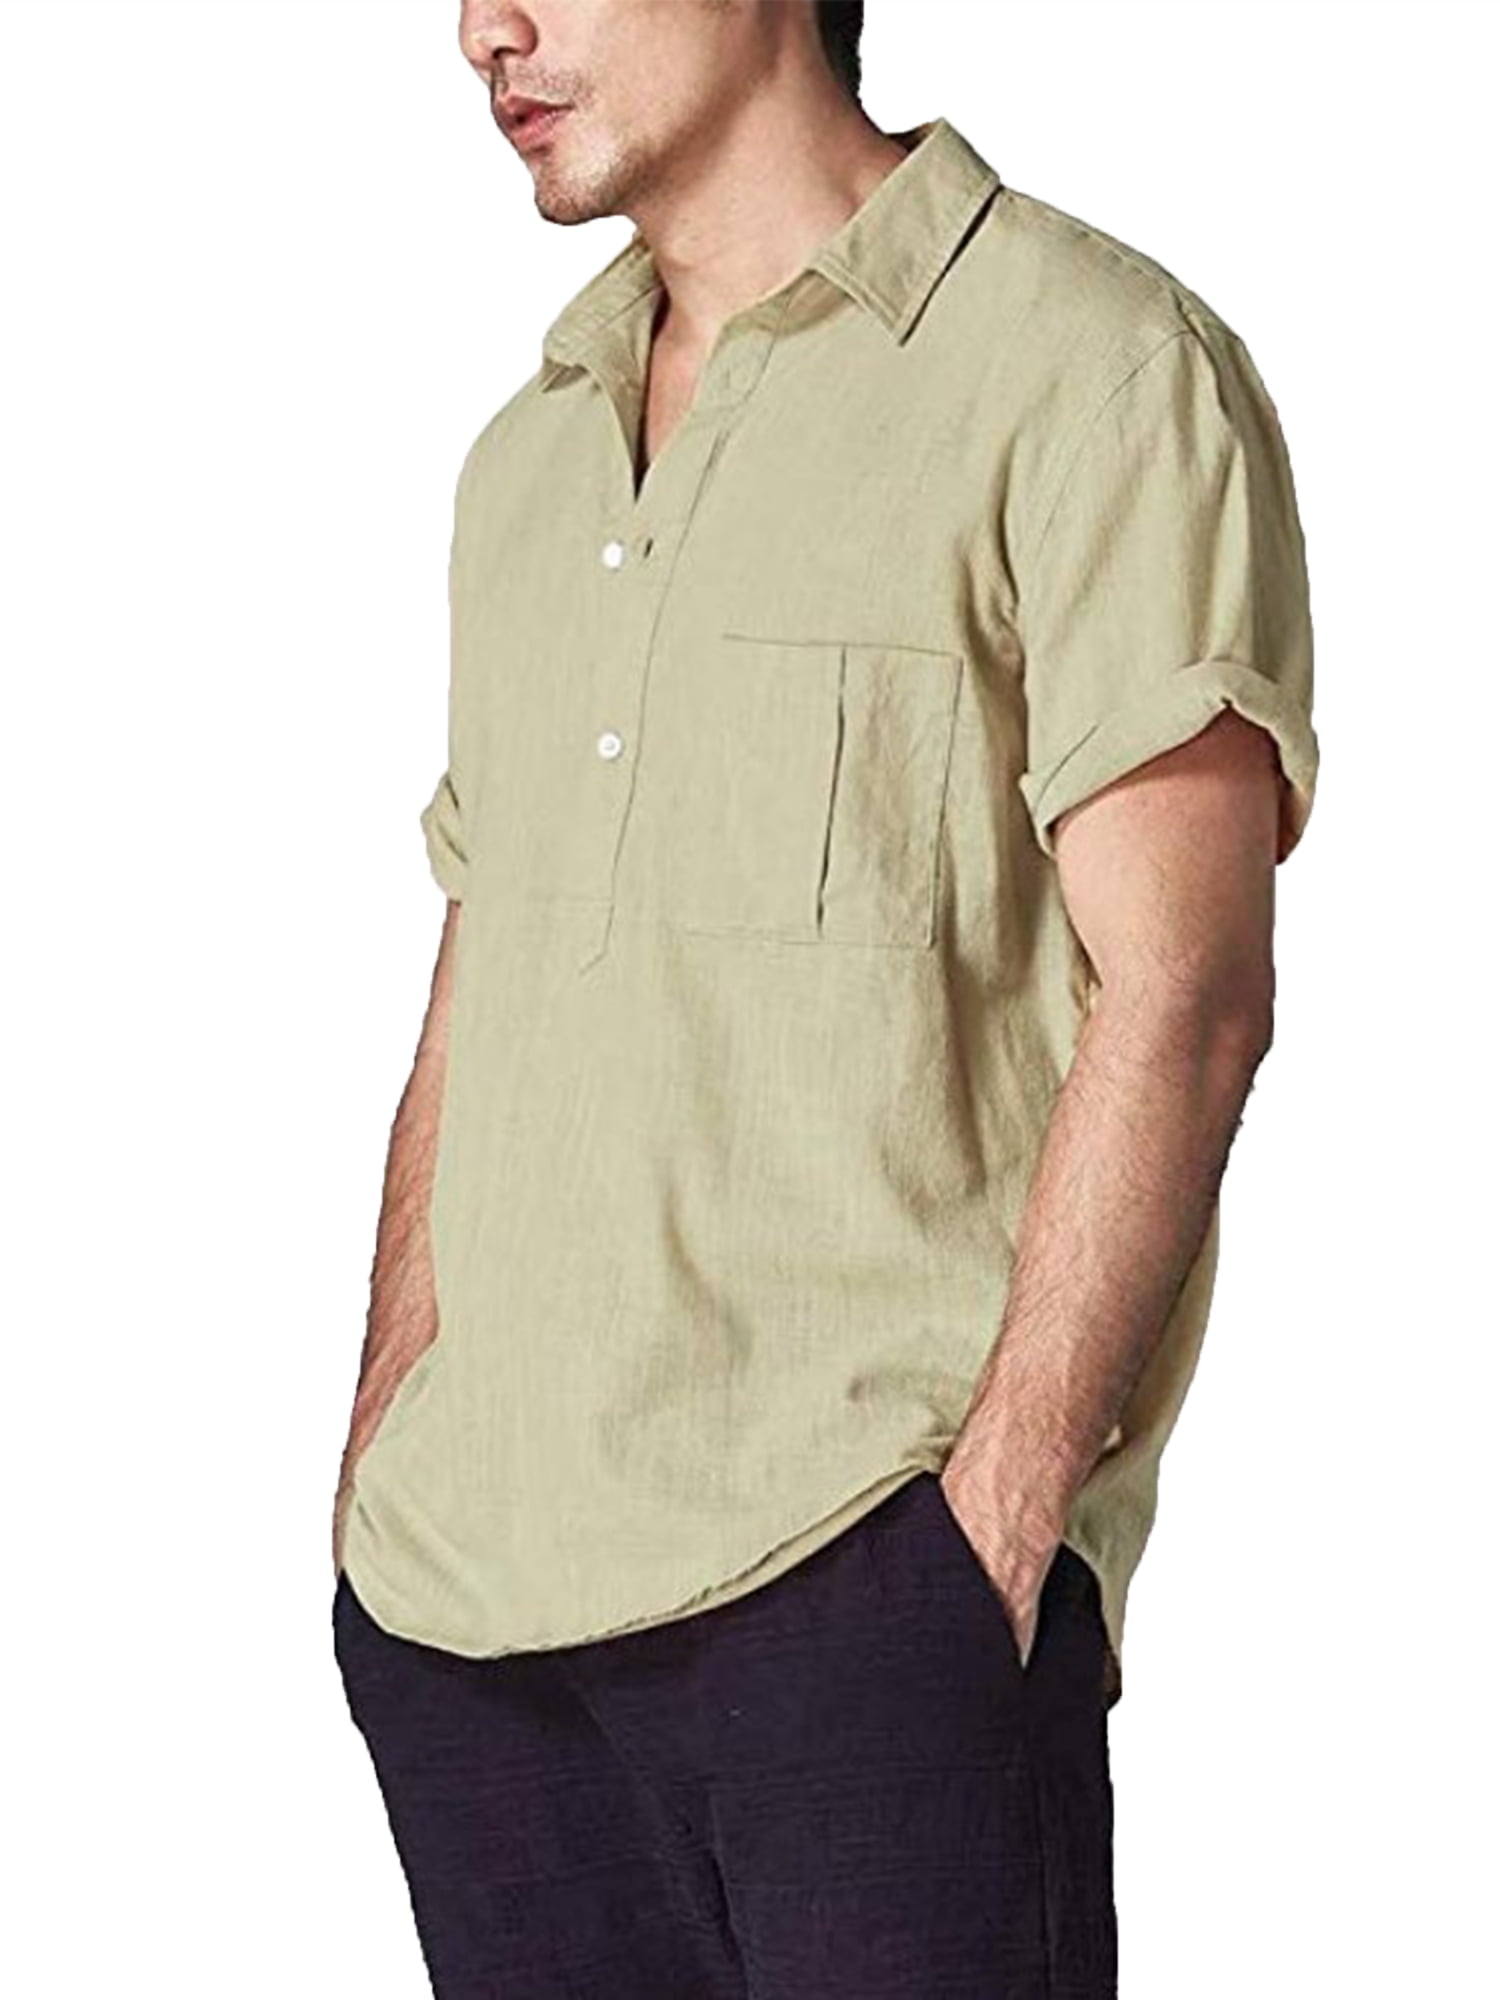 Mens Cotton Henley Shirts Short Sleeve with Pocket Solid Color Basic Tshirt 